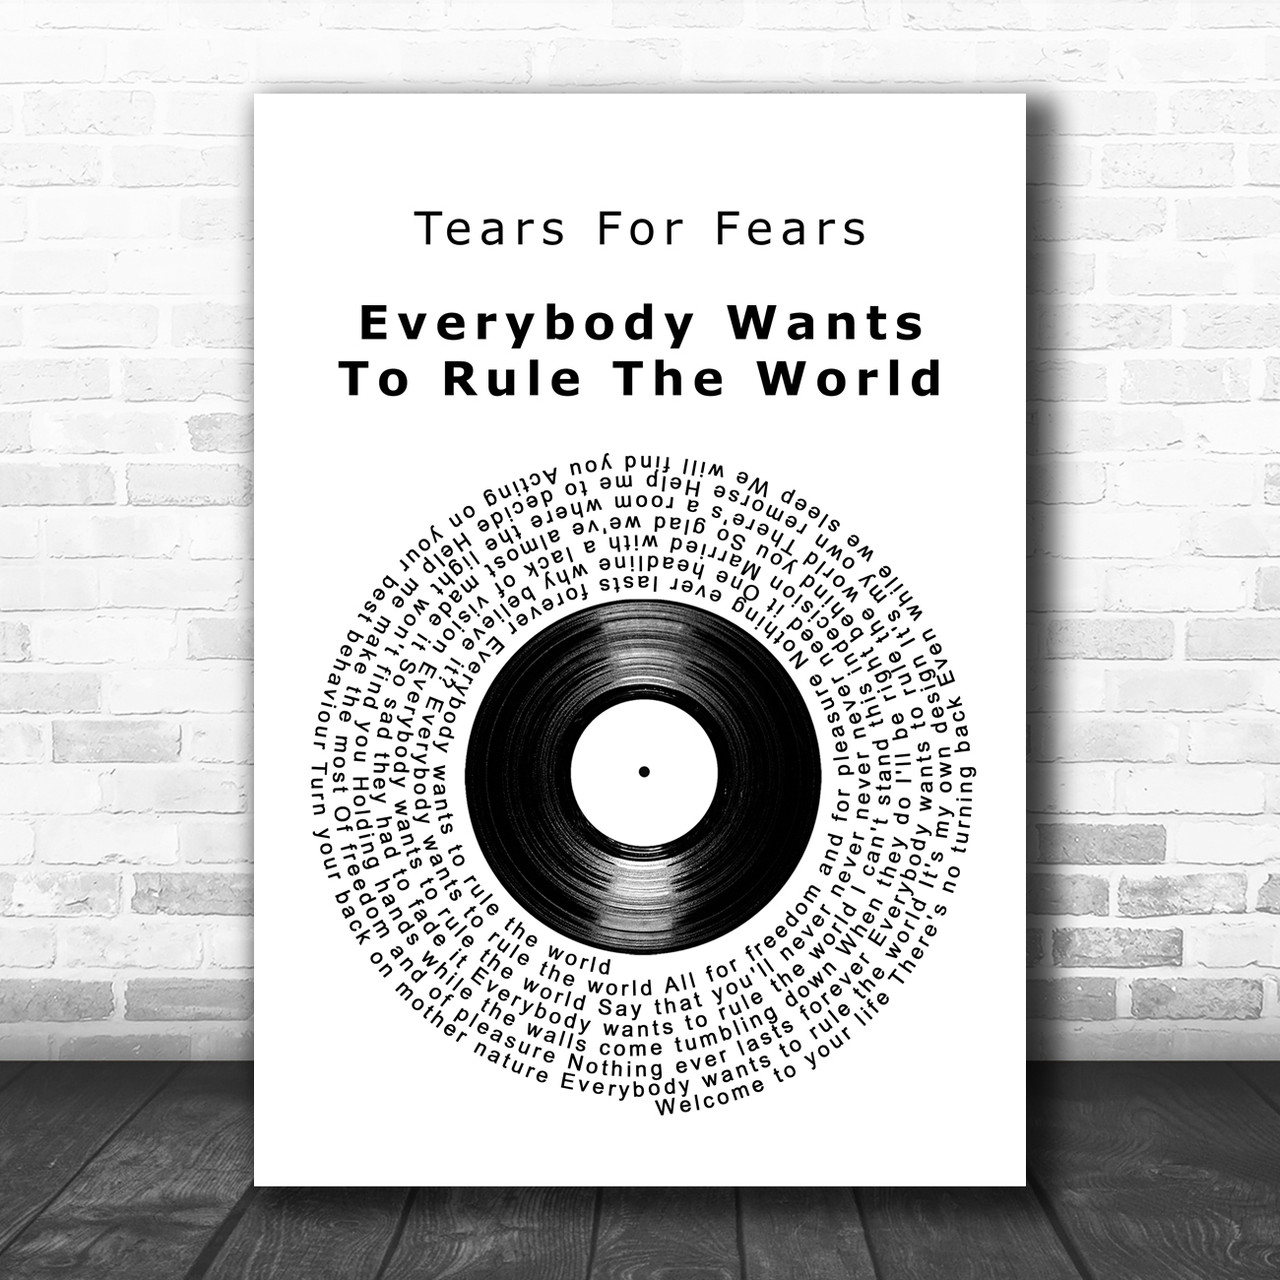 Tears For Fears - Everybody Wants To Rule The World (C.I.S.C.O Edit)